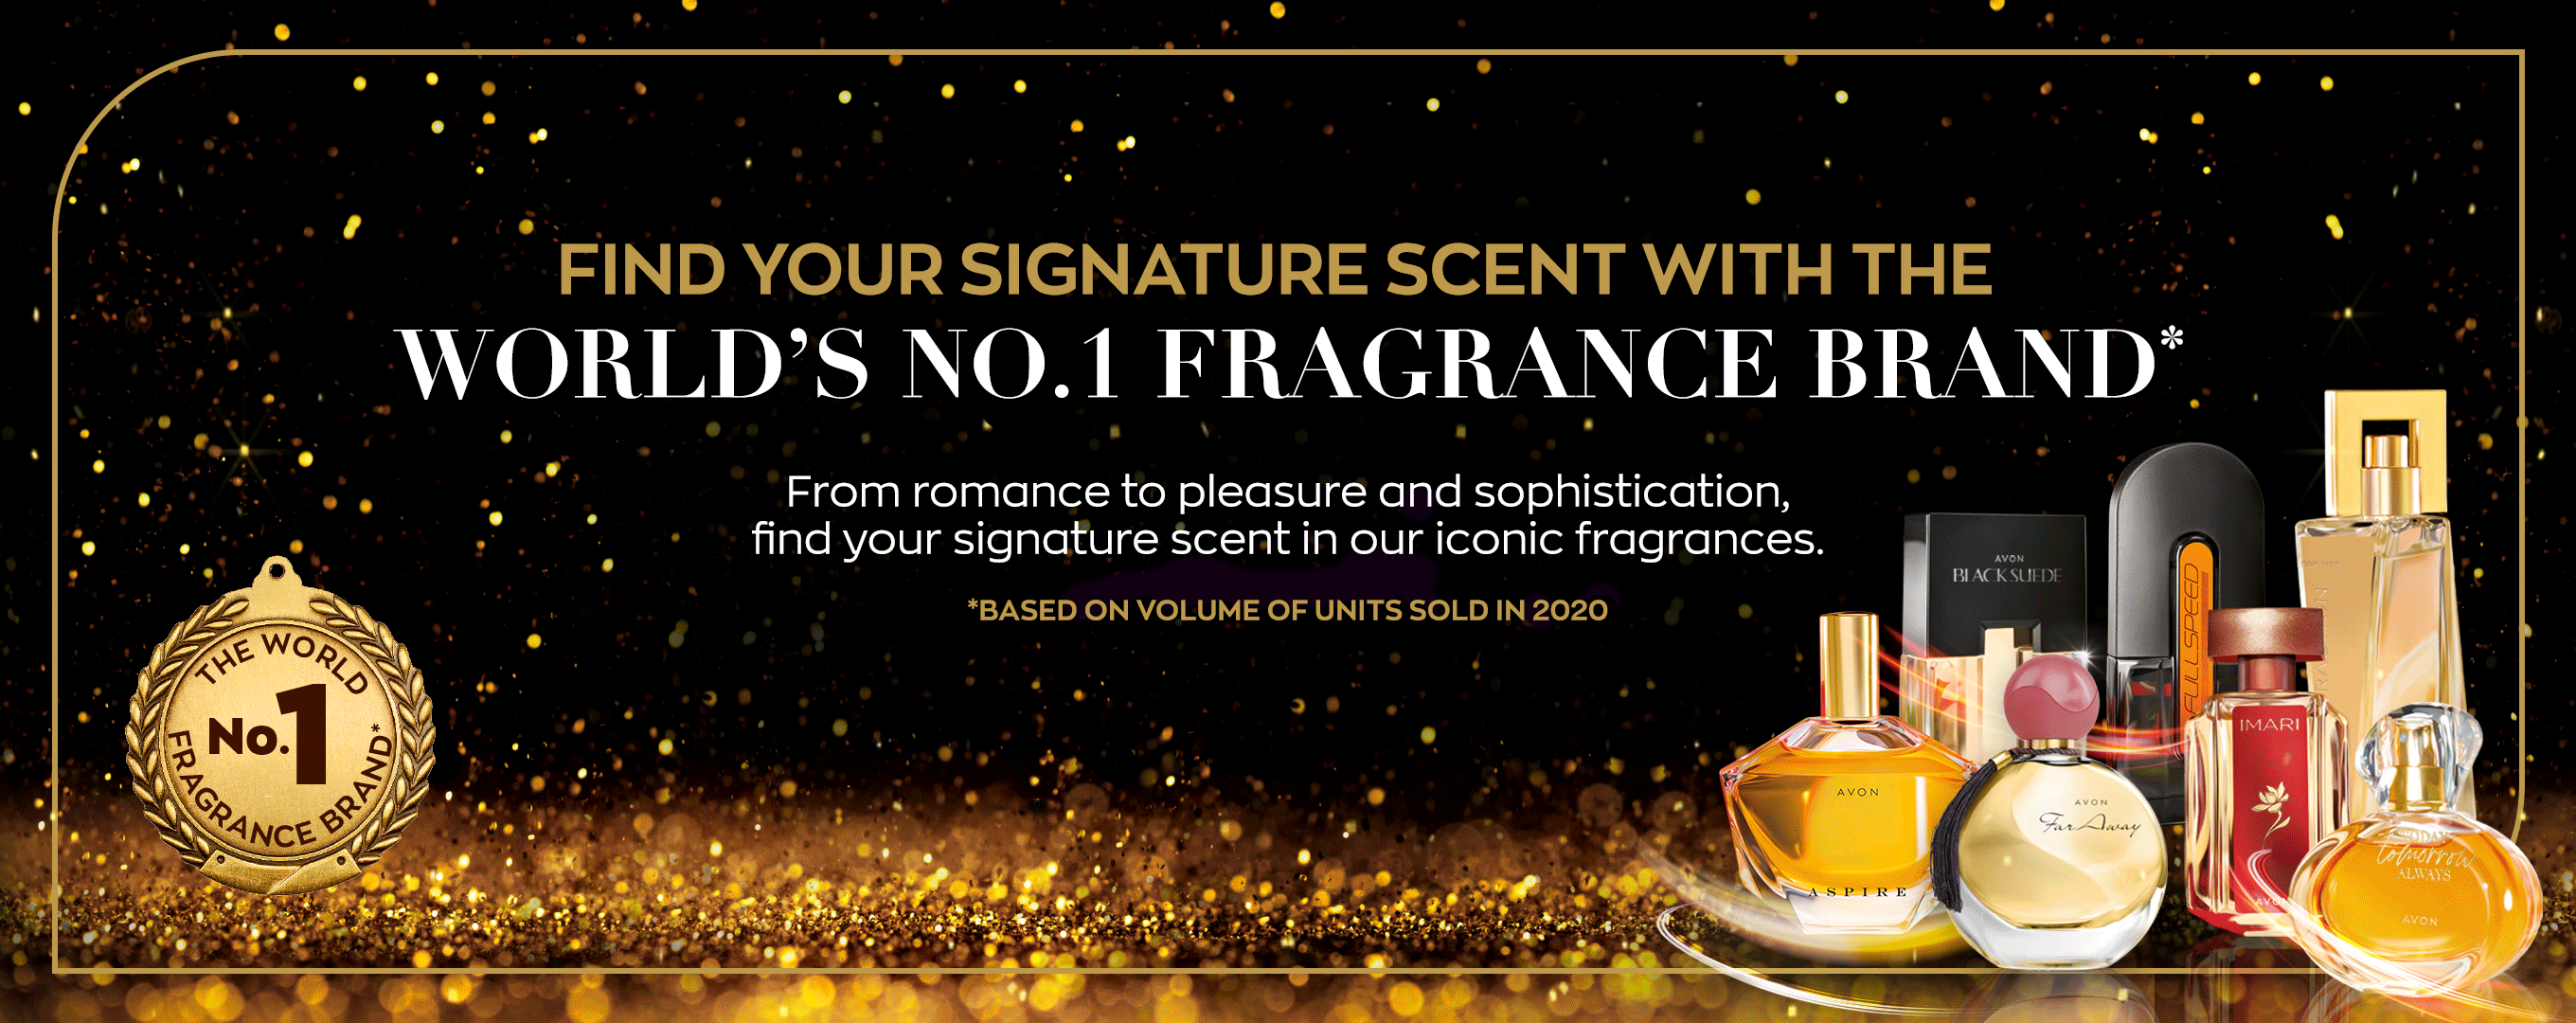 Fragrance 101: A Guide to Finding Your Signature Scent